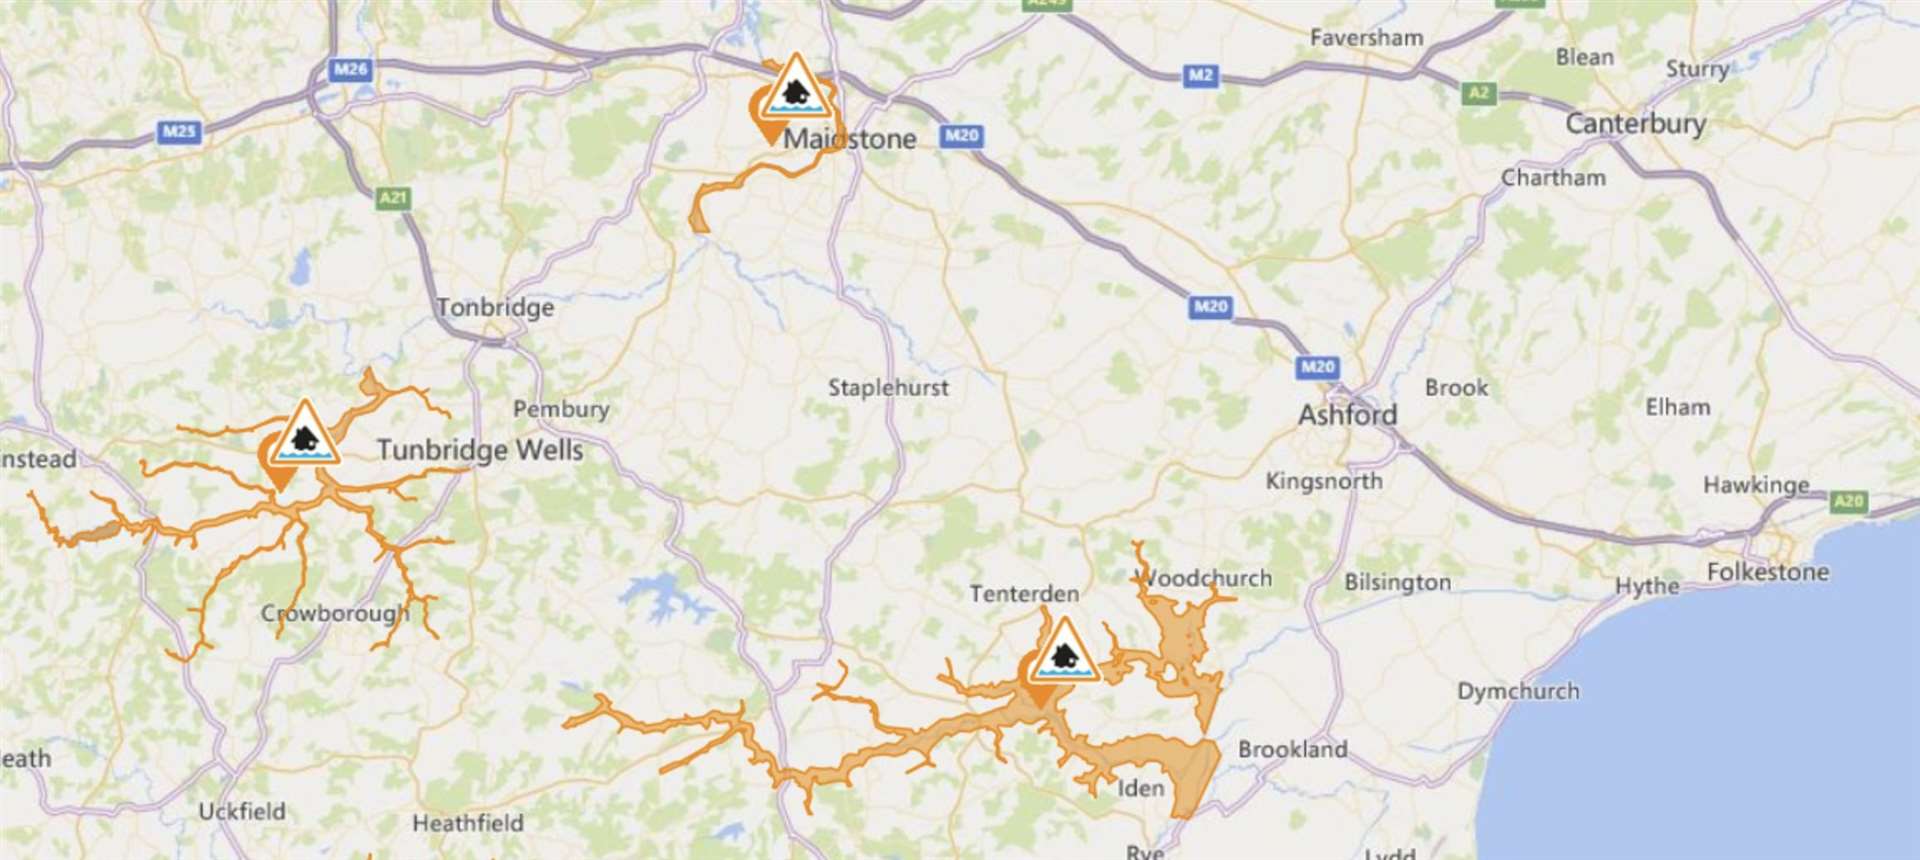 The Environment Agency has issued flood alerts for three parts of Kent